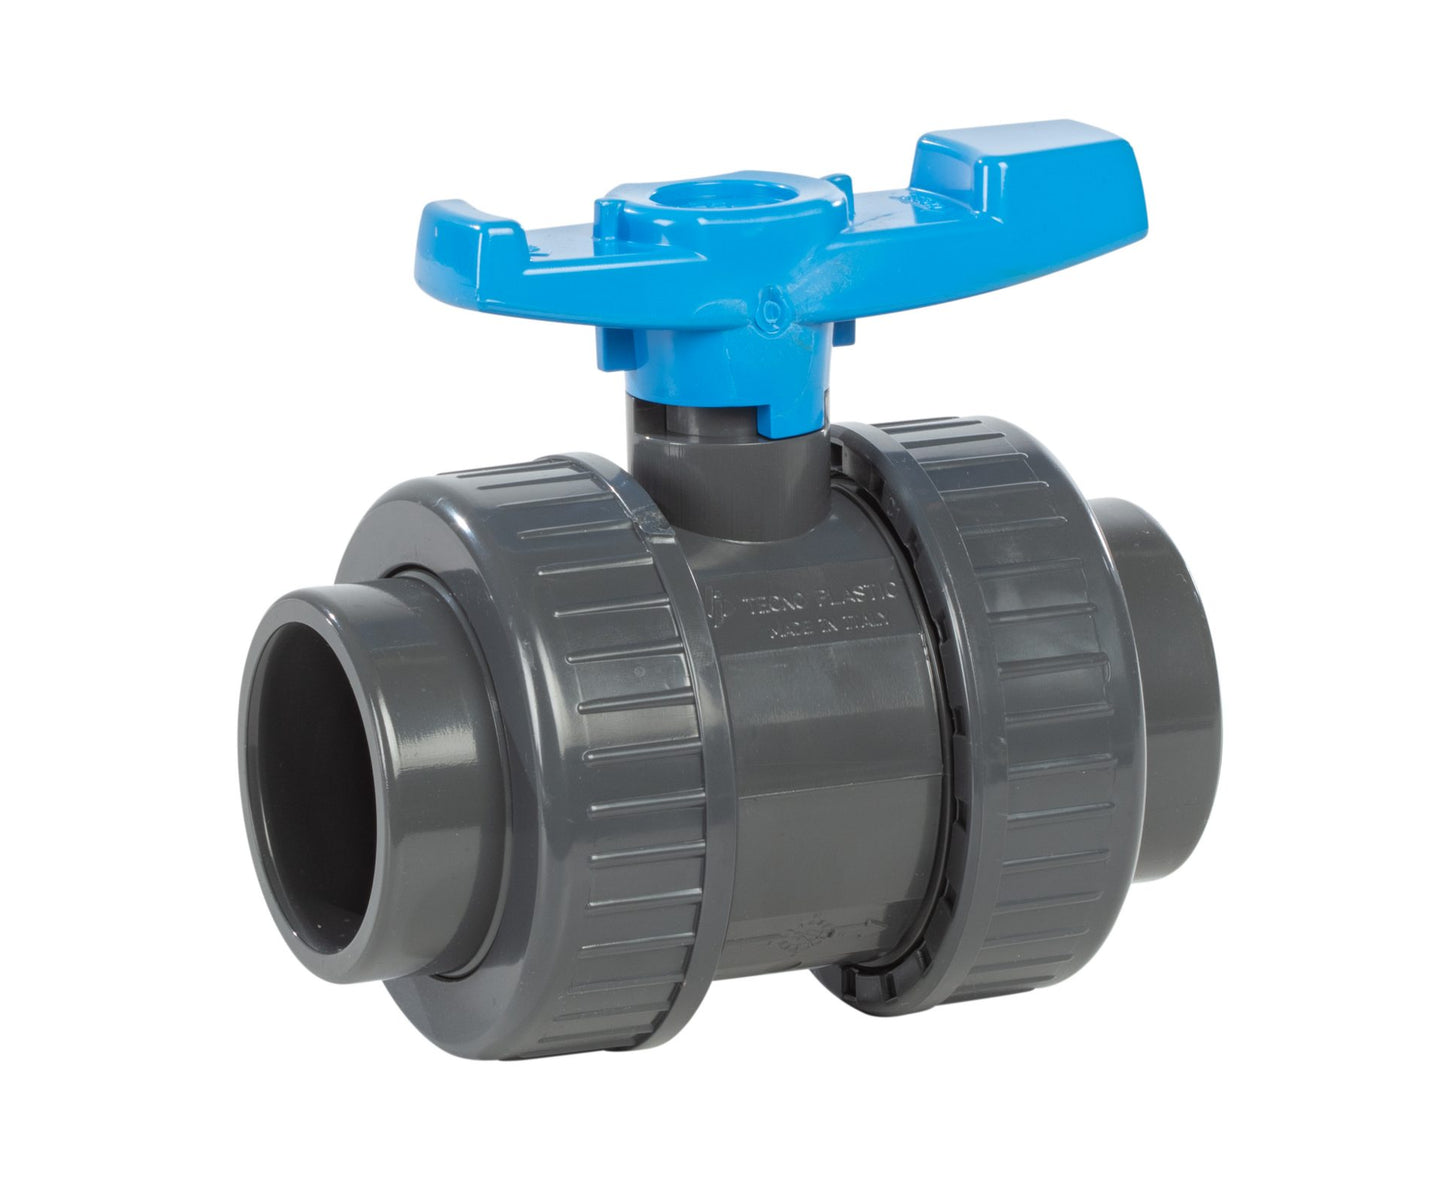 110mm TP (Waste pipe) Ball Valve (Double Union) BLUE HANDLE